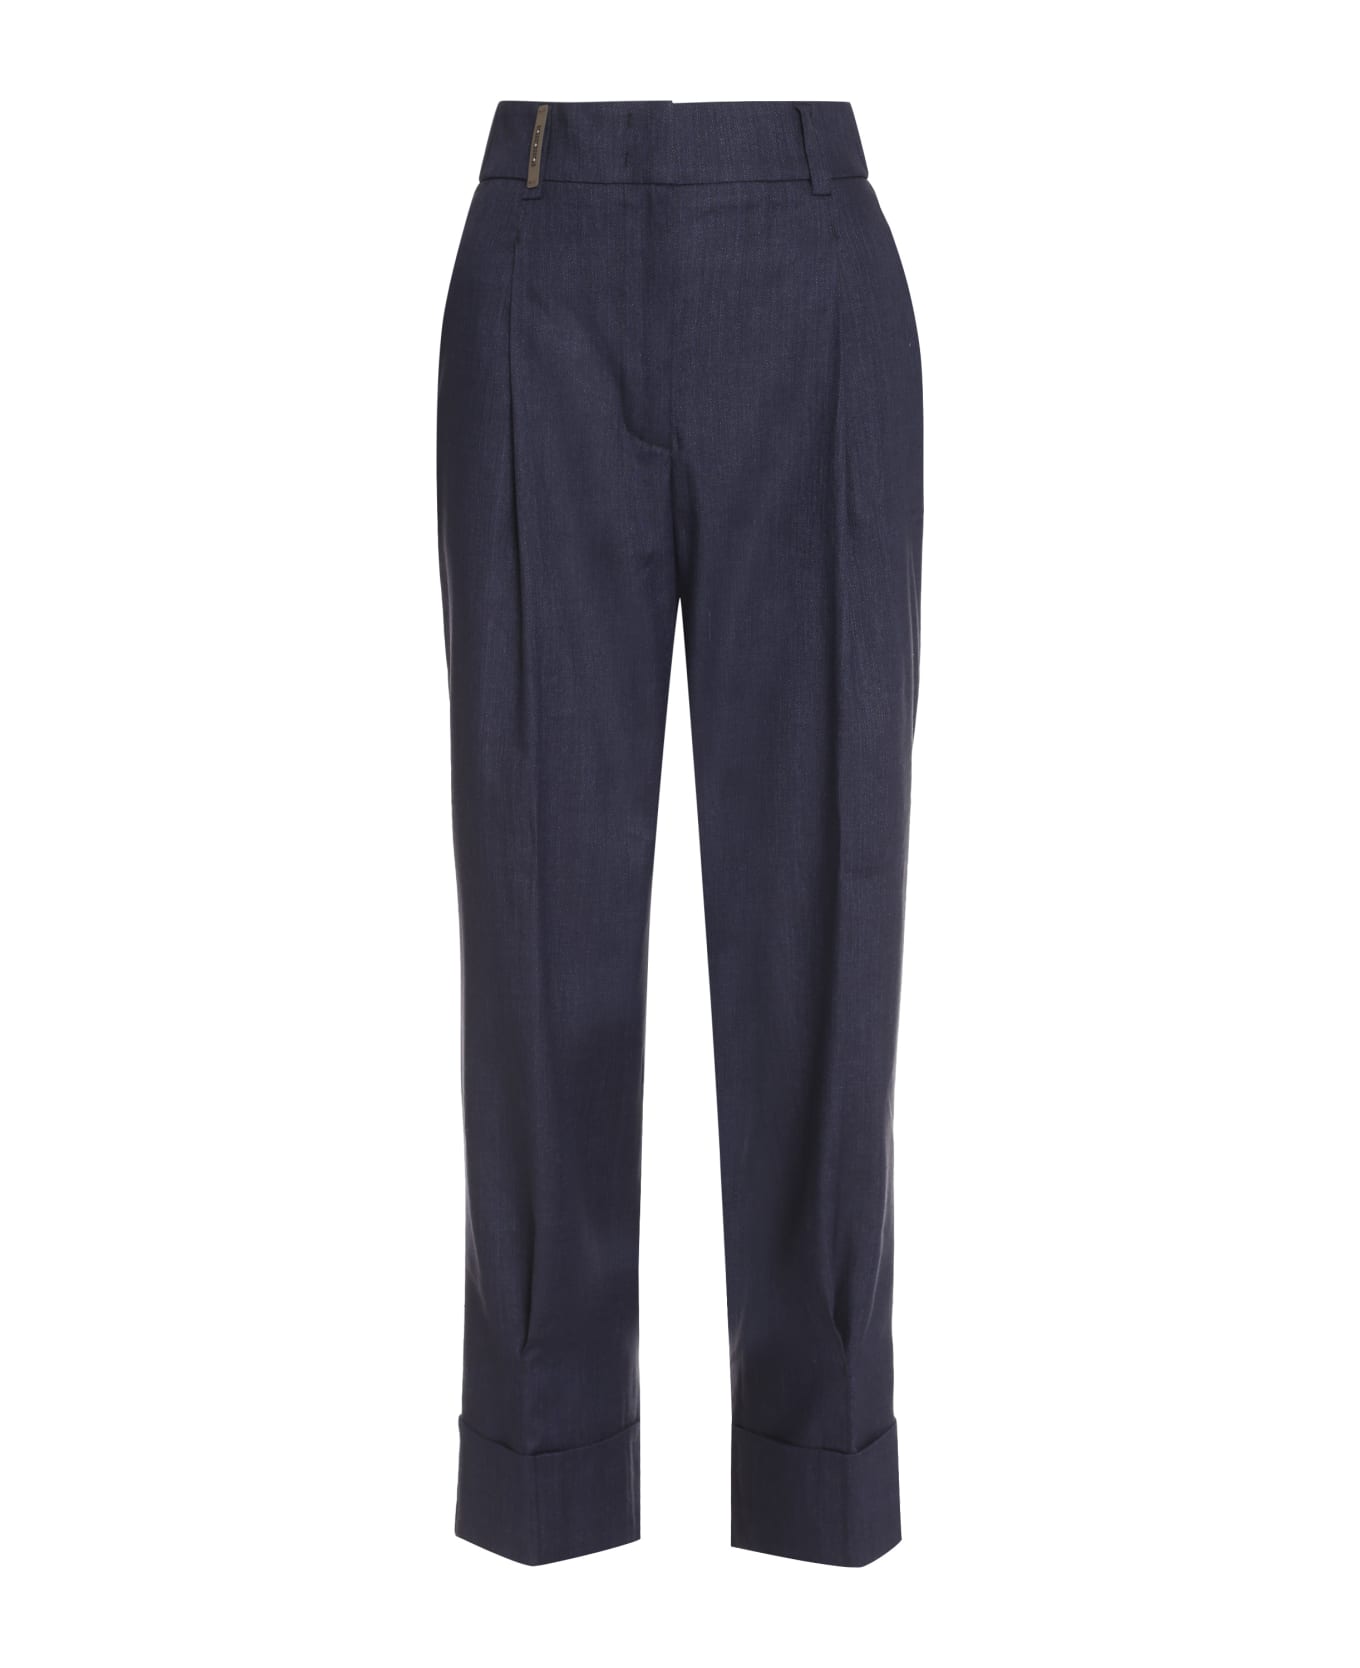 Peserico Wool Blend Trousers - blue ボトムス